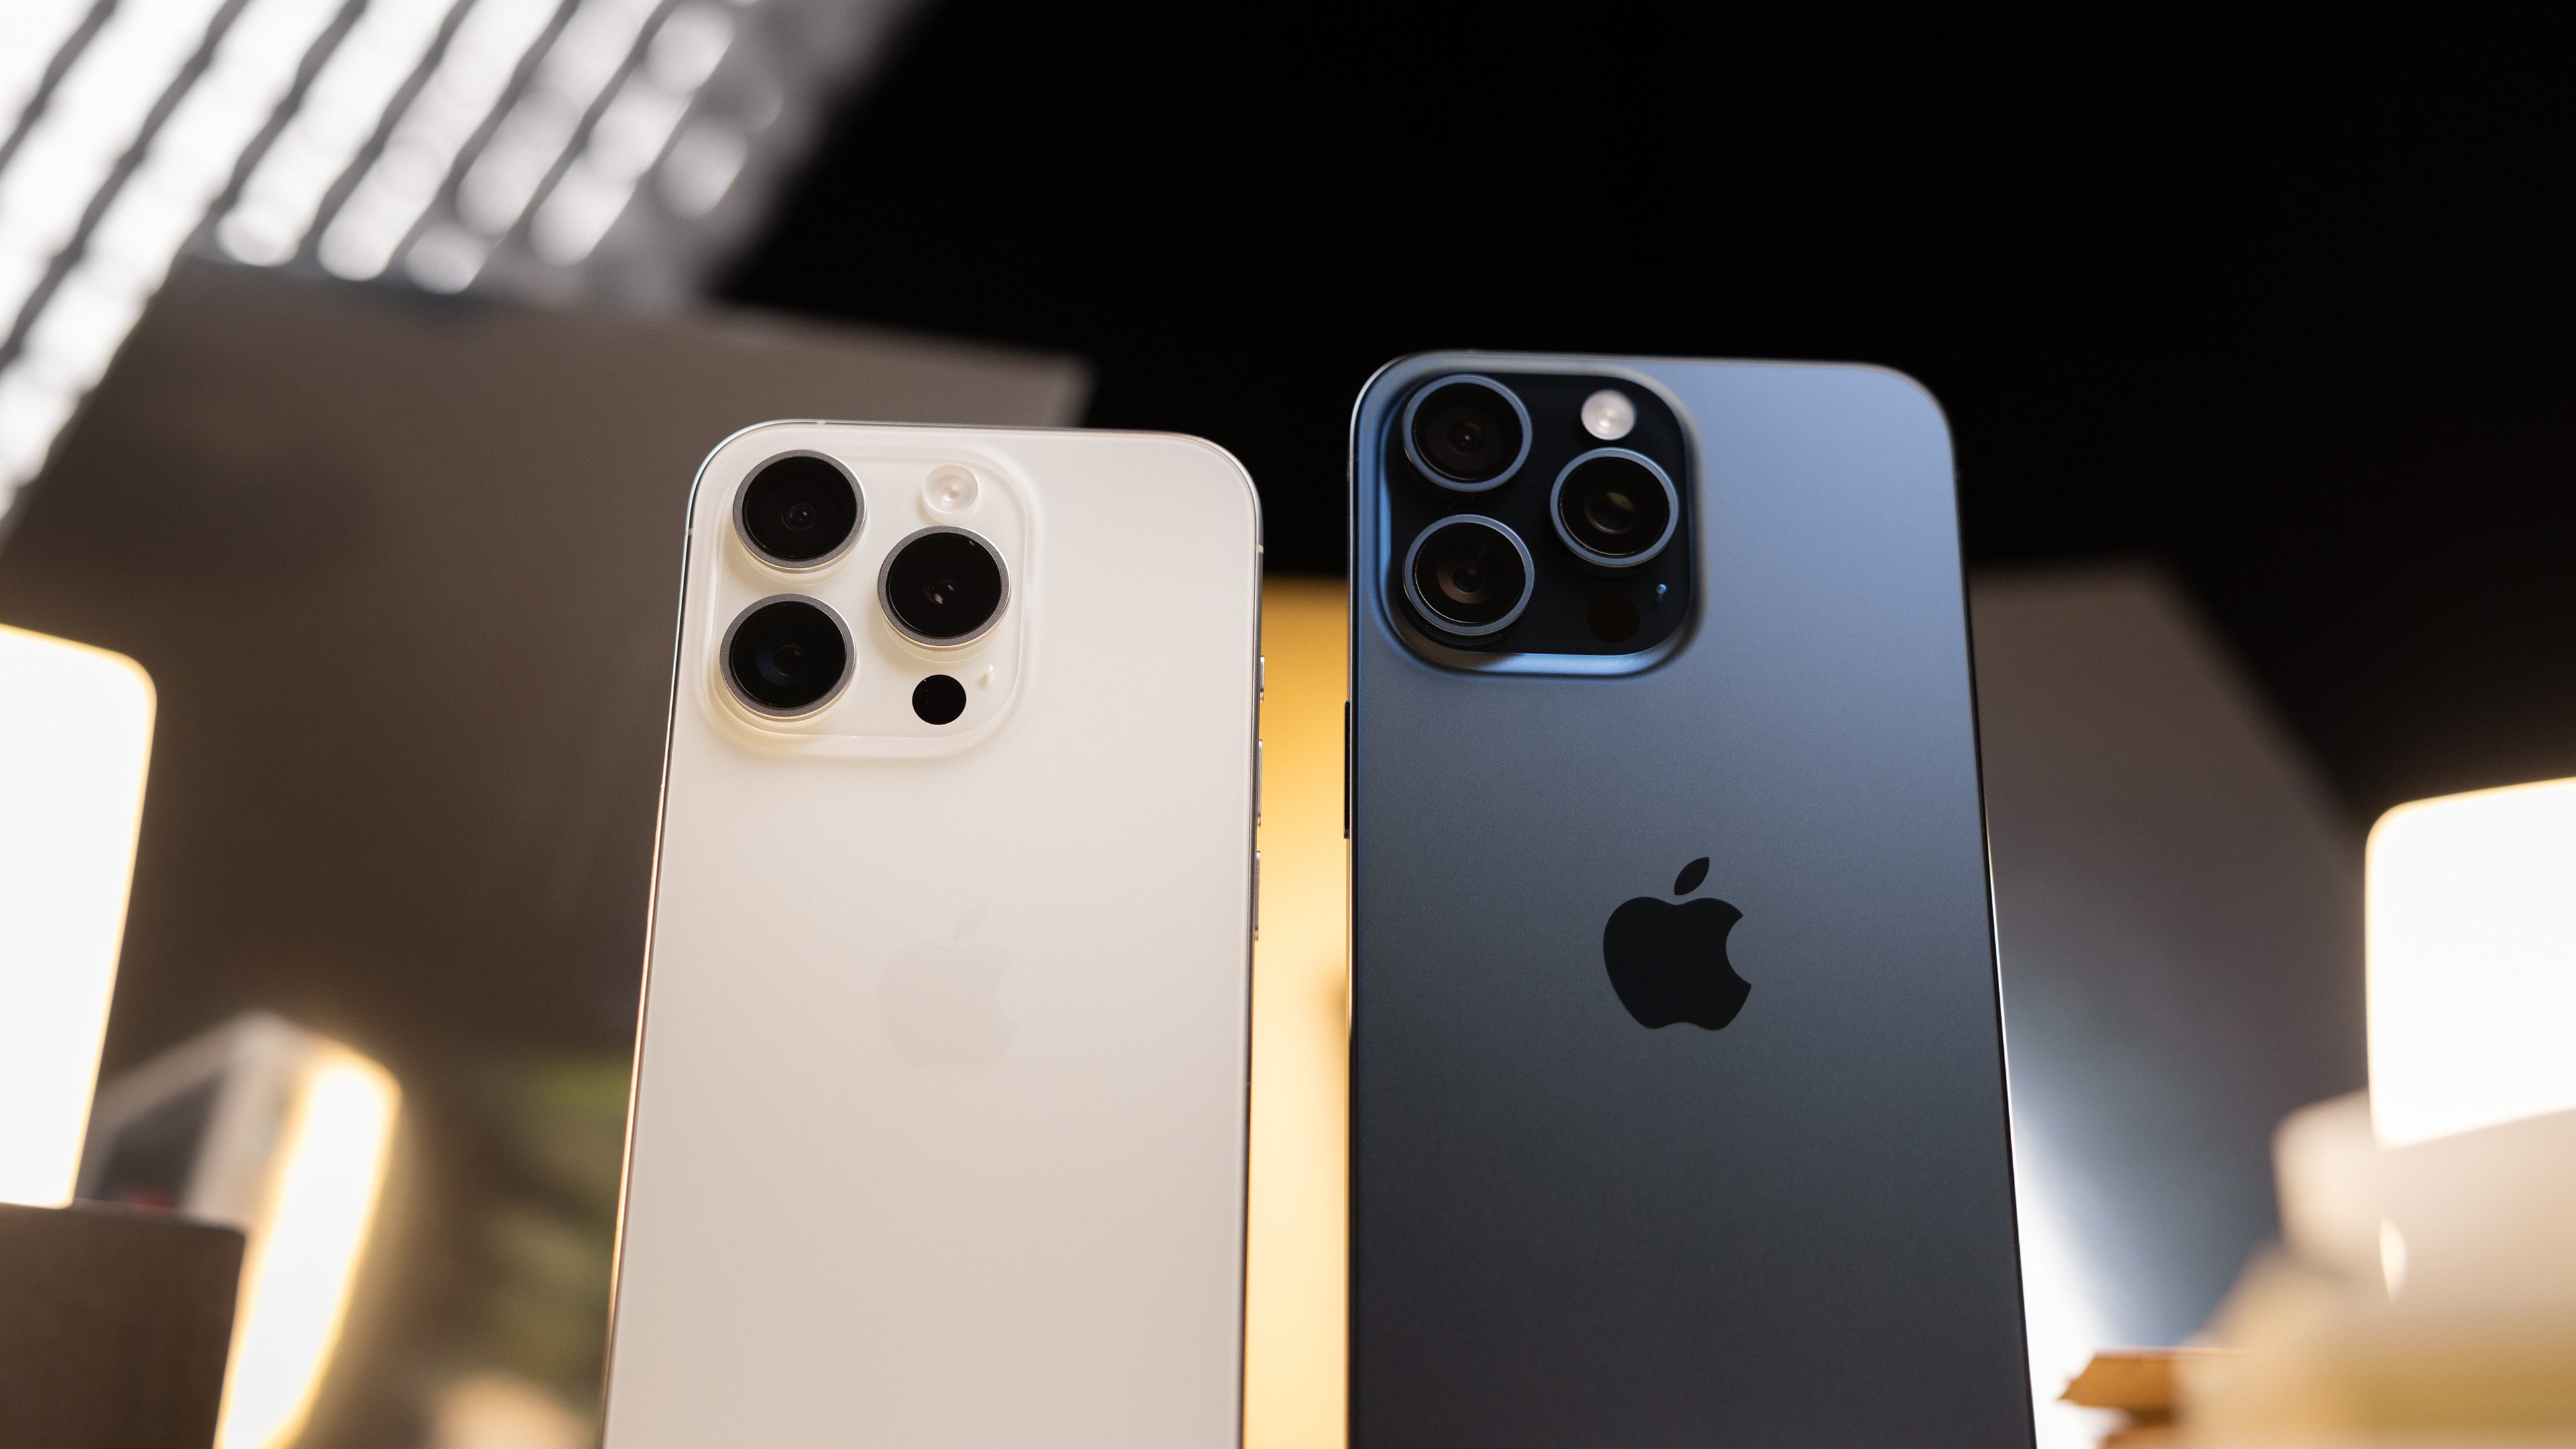 iPhone 15 Pro vs. iPhone 15 Pro Max: The biggest differences